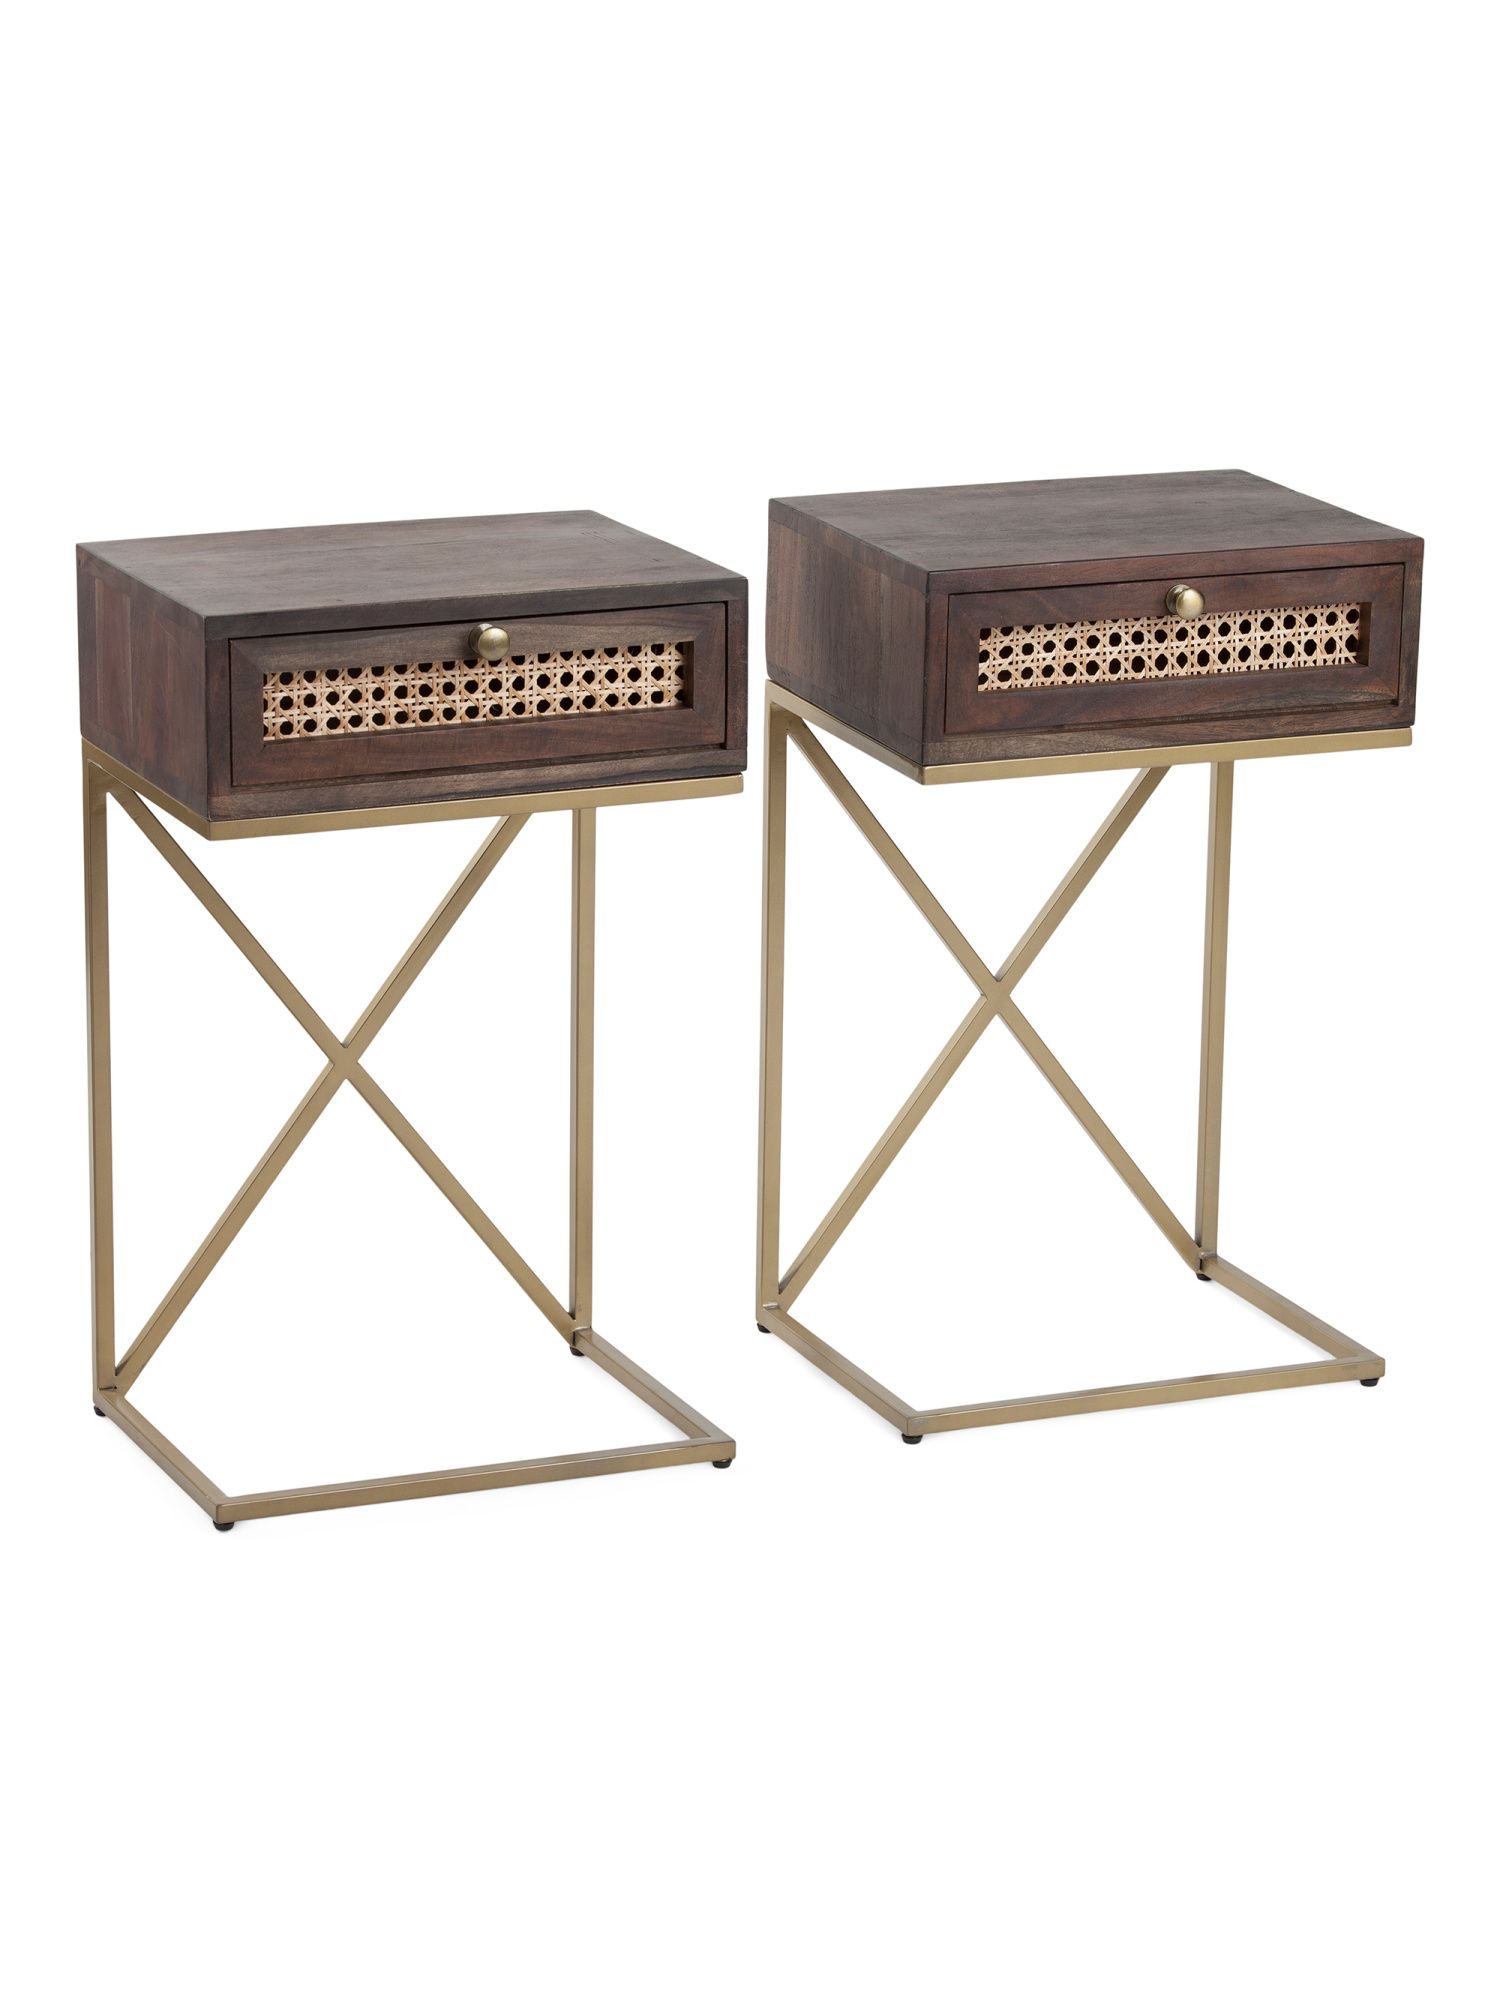 Set Of 2 Acacia Wood And Cane Side Tables | TJ Maxx